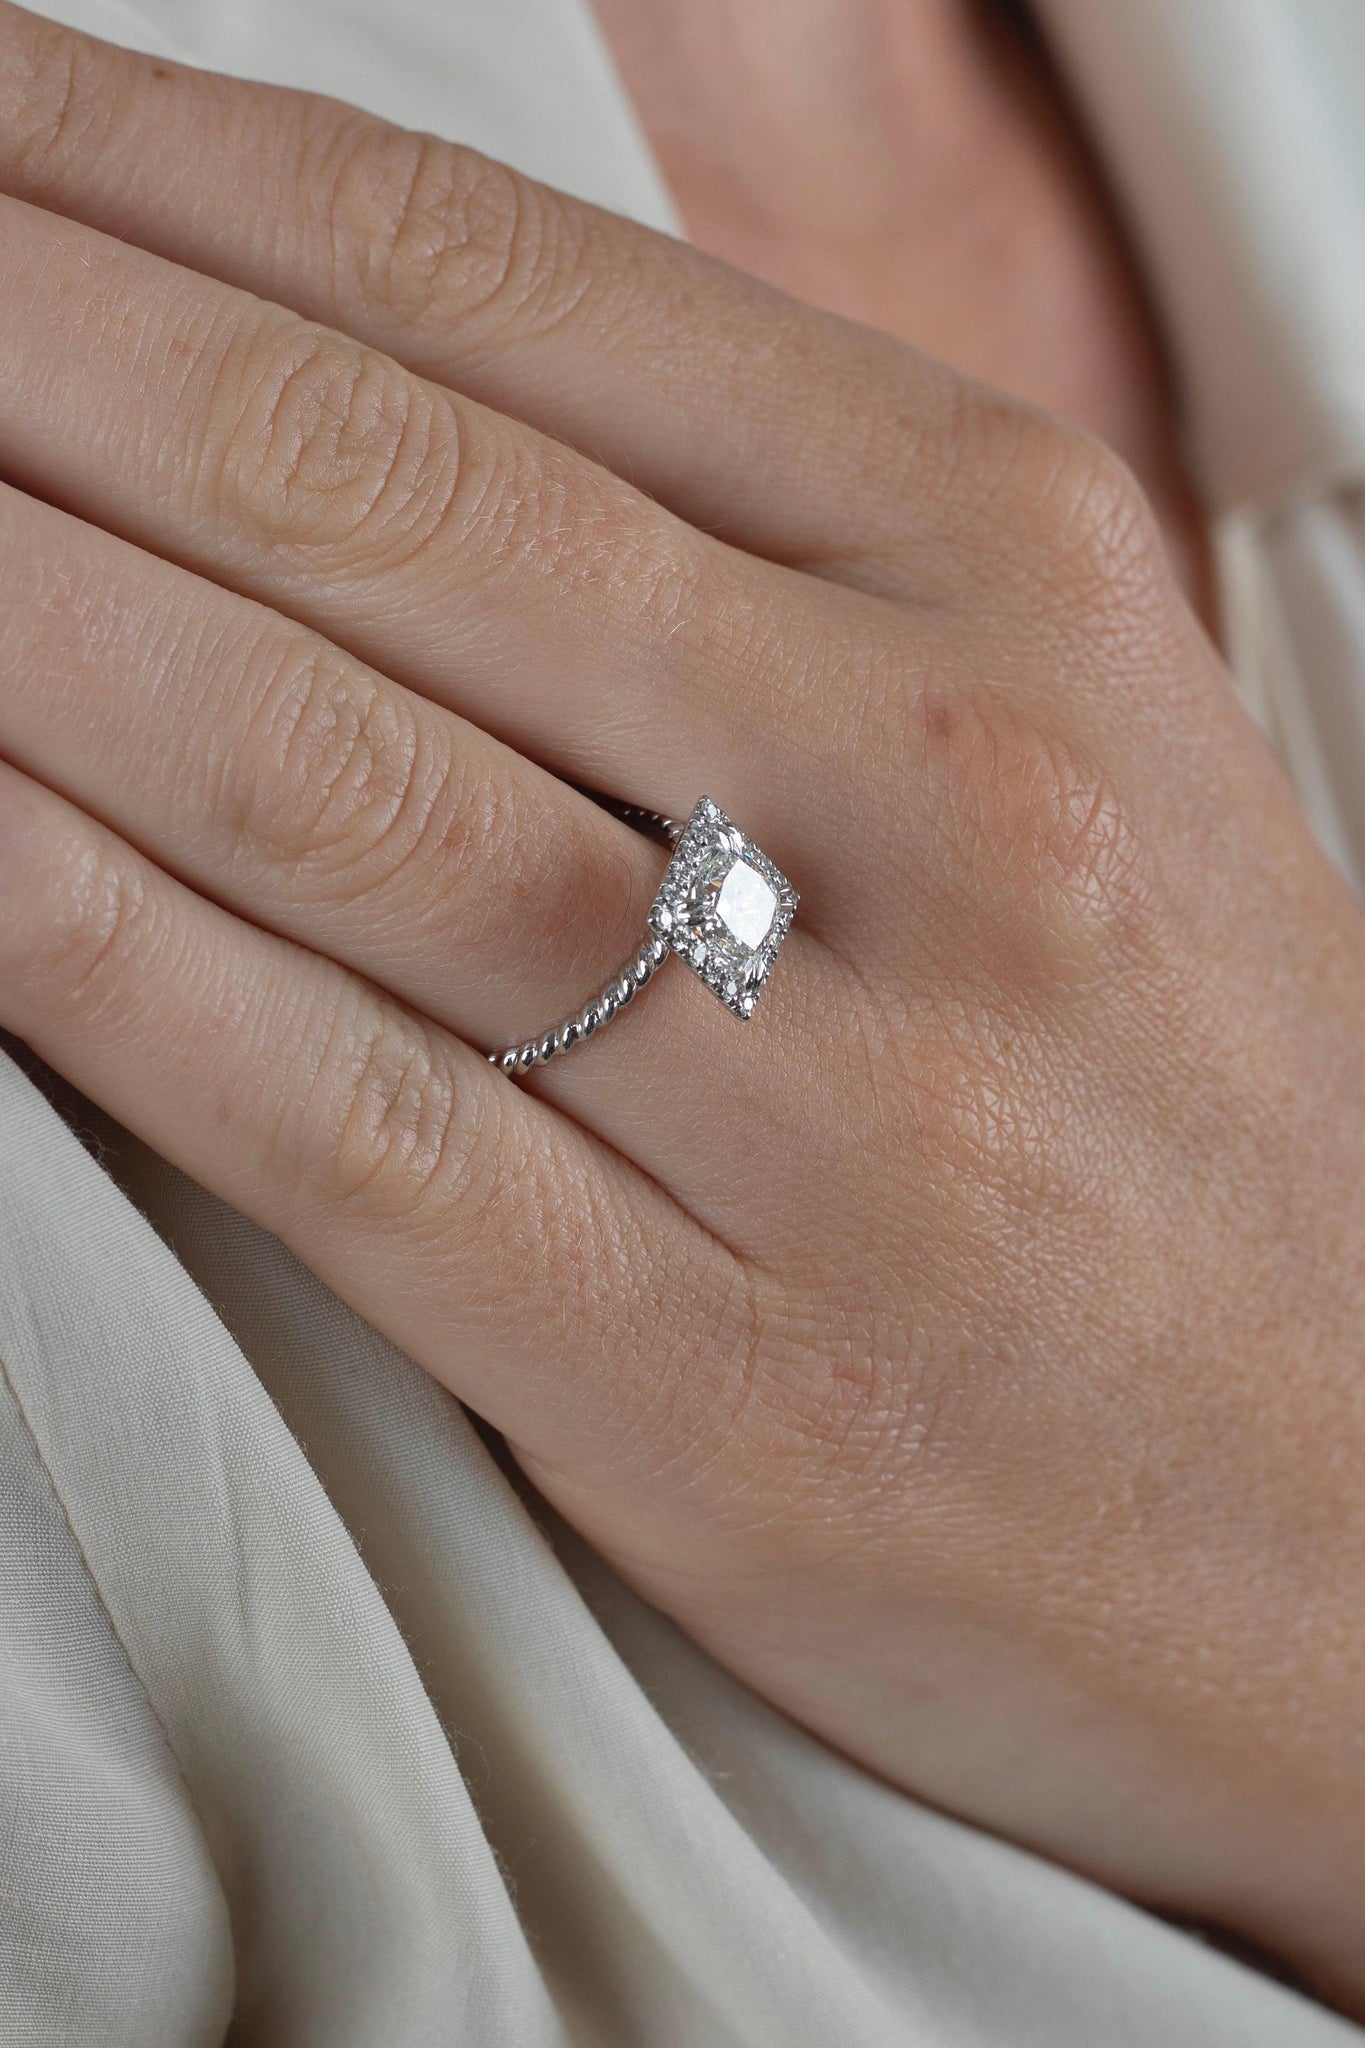 Keyzar · How To Snag The Most Stunning Princess Cut Engagement Ring  Princess Cut Engagement Rings - The Square That Slays